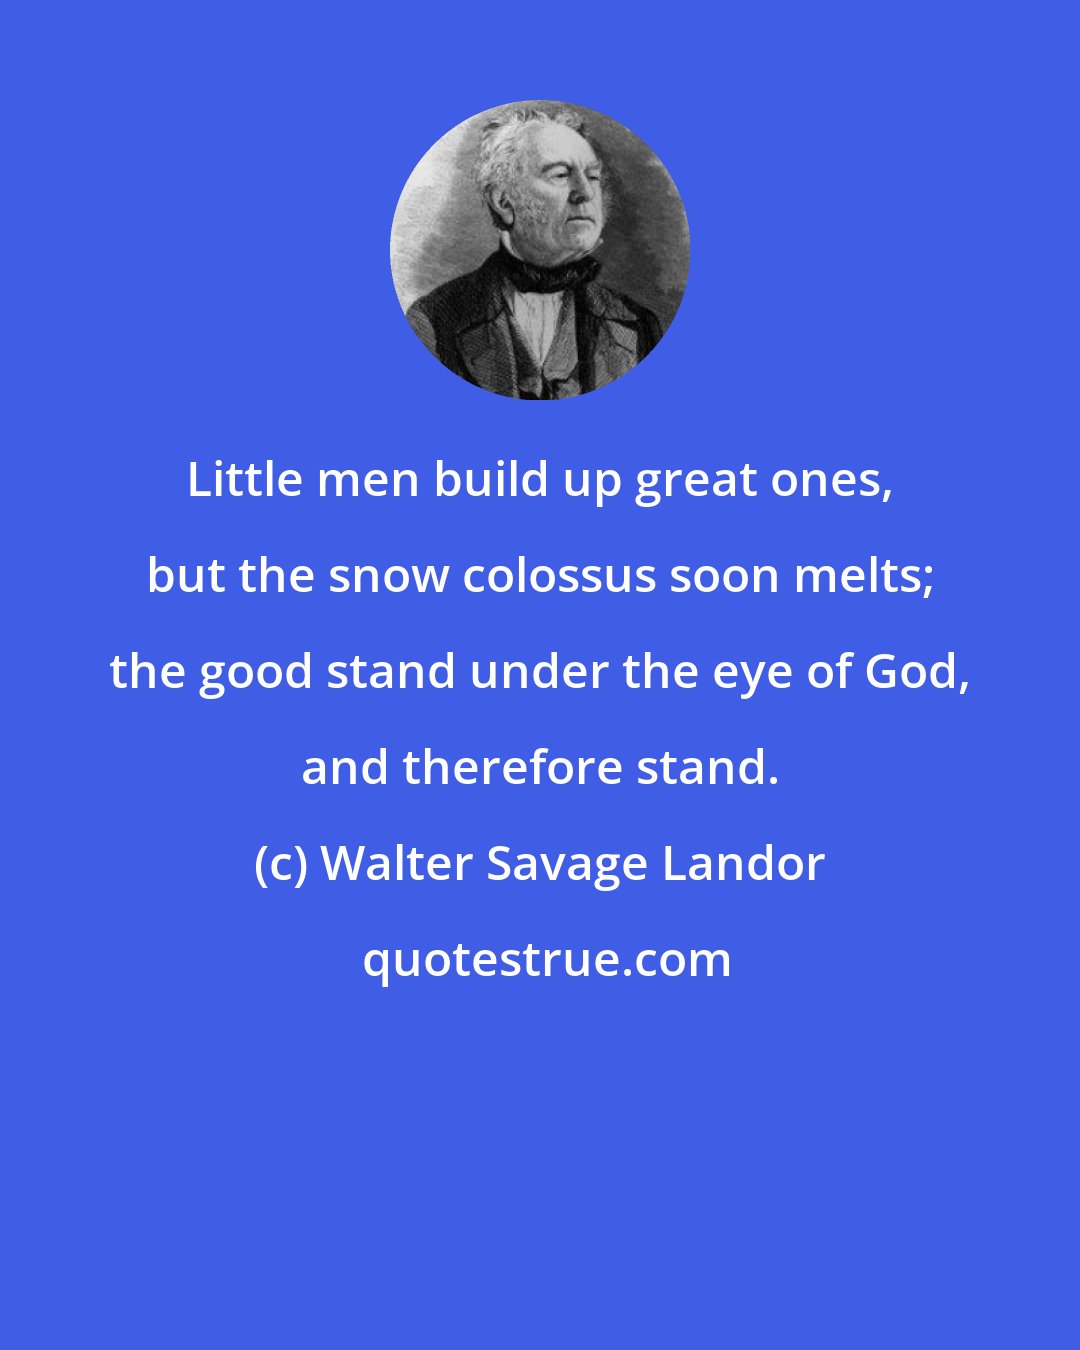 Walter Savage Landor: Little men build up great ones, but the snow colossus soon melts; the good stand under the eye of God, and therefore stand.